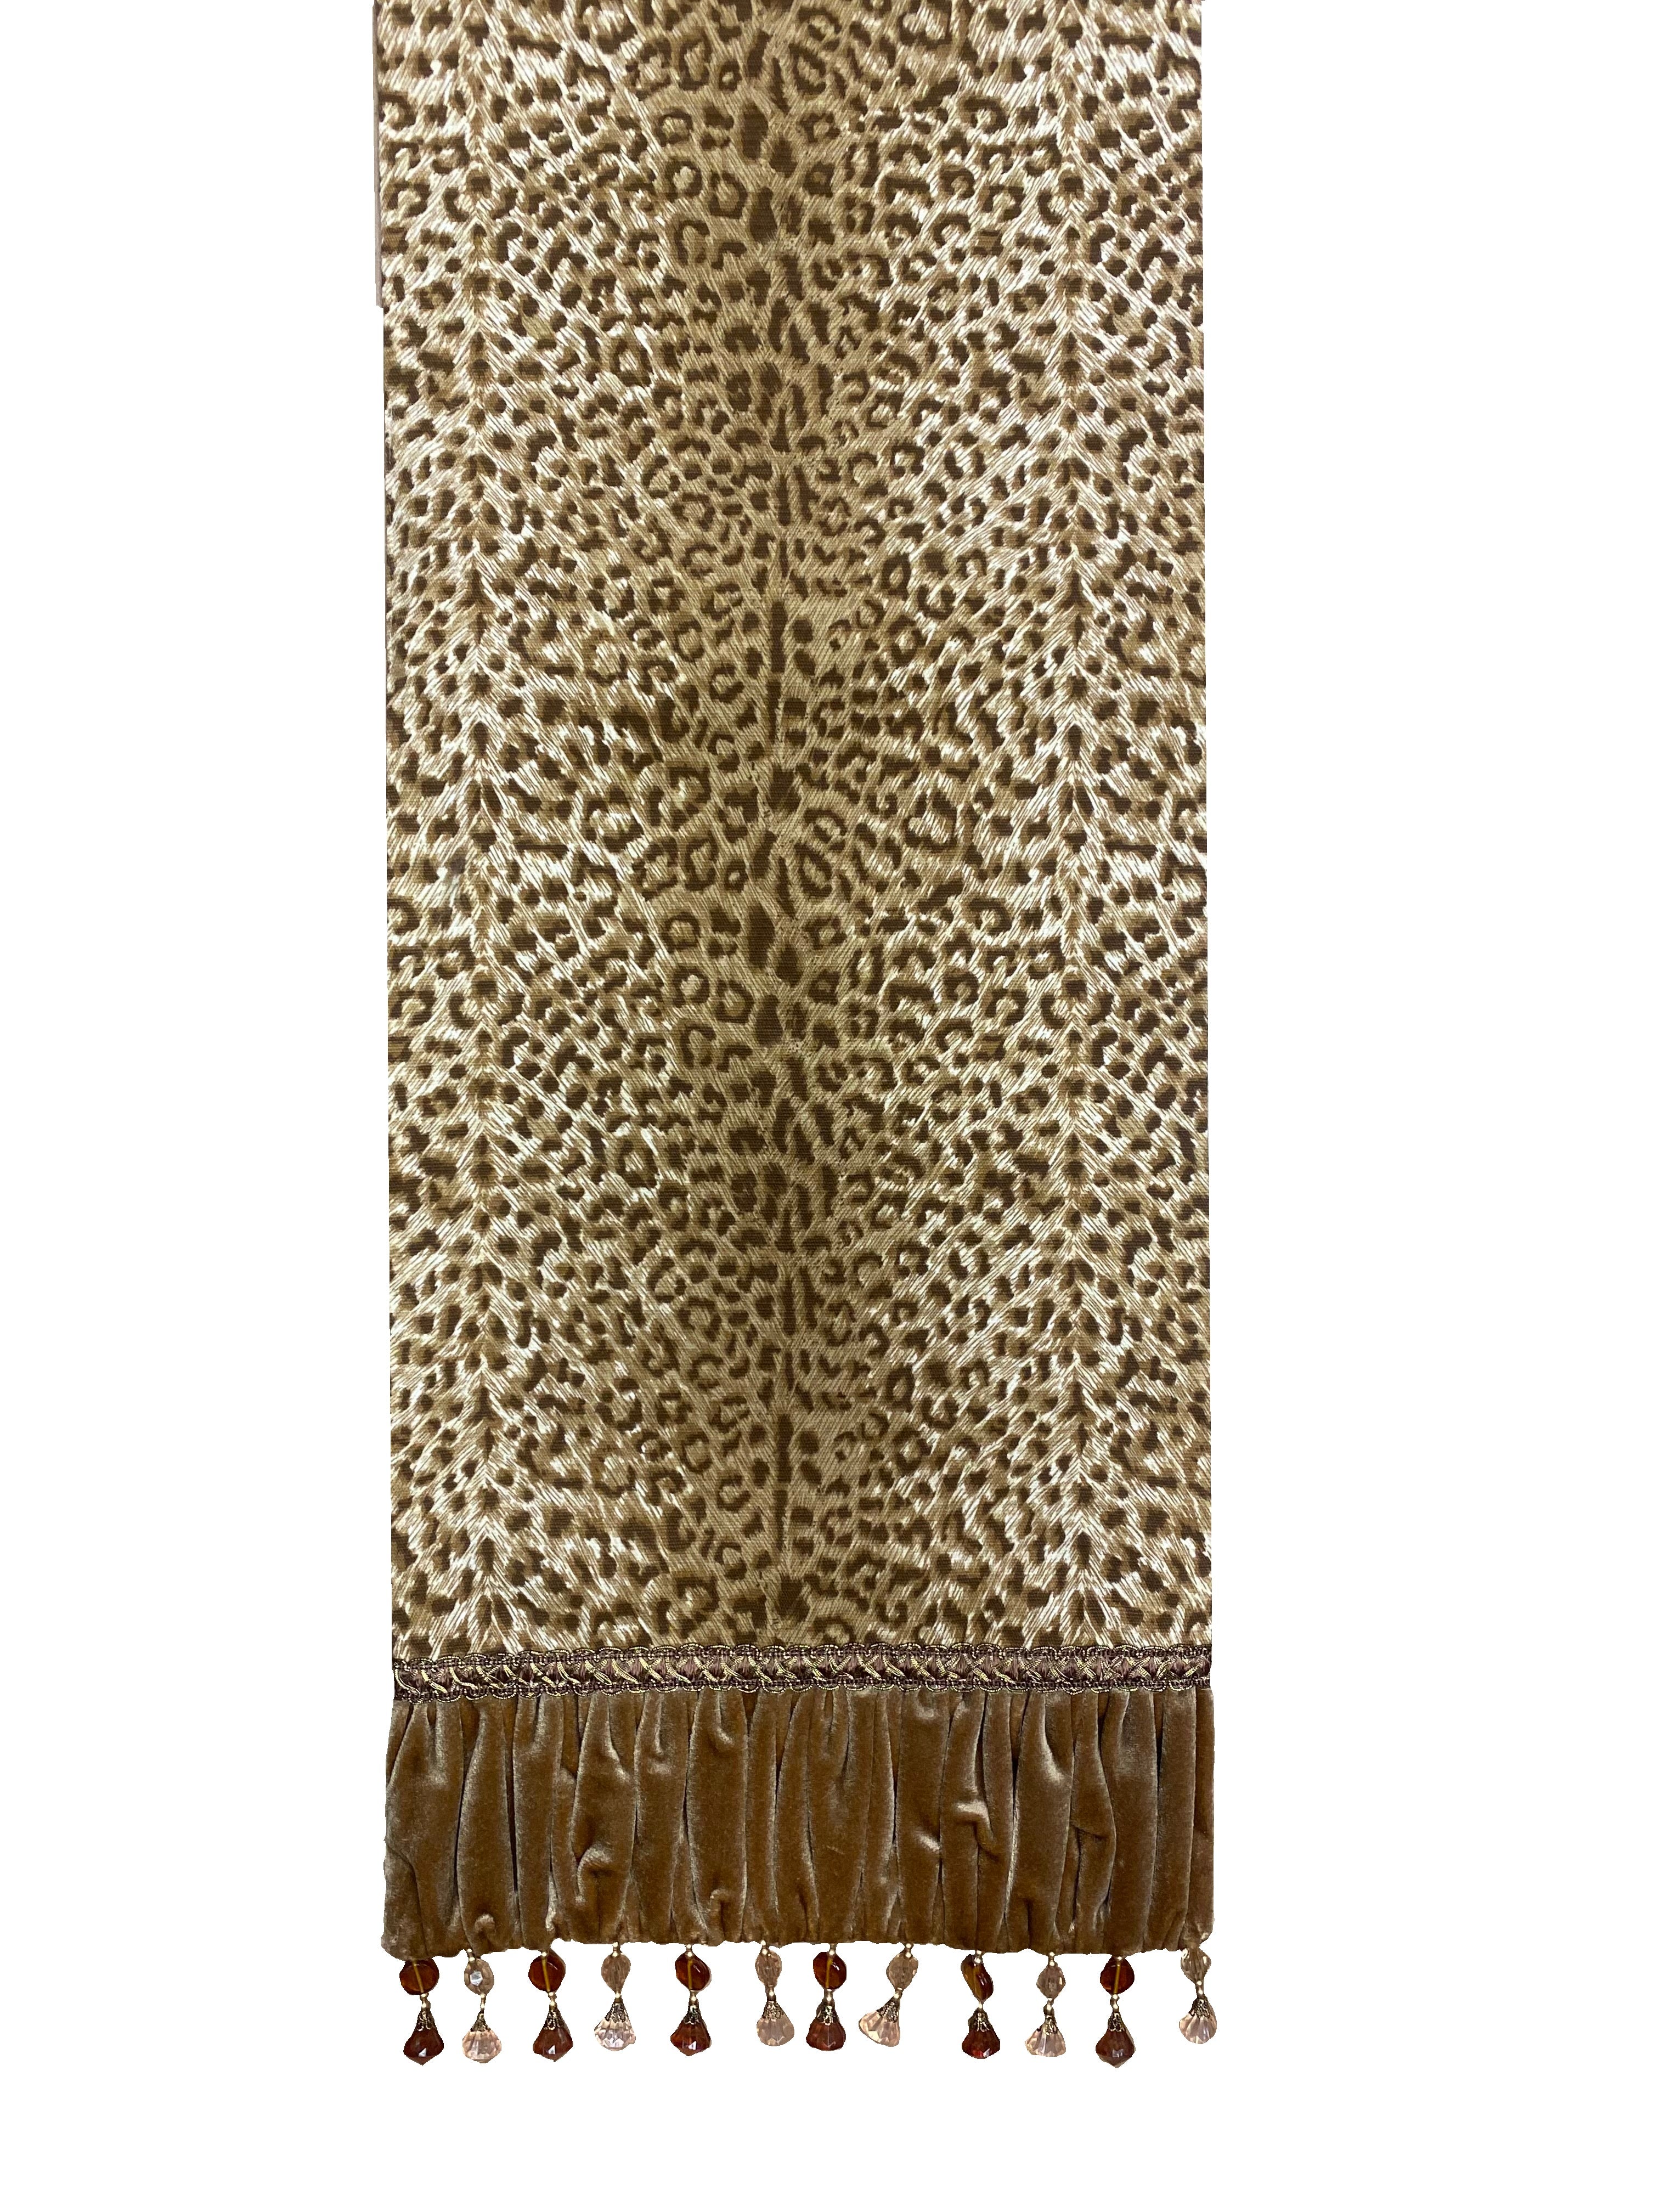 Small Decorative Gold Leopard Table Runner